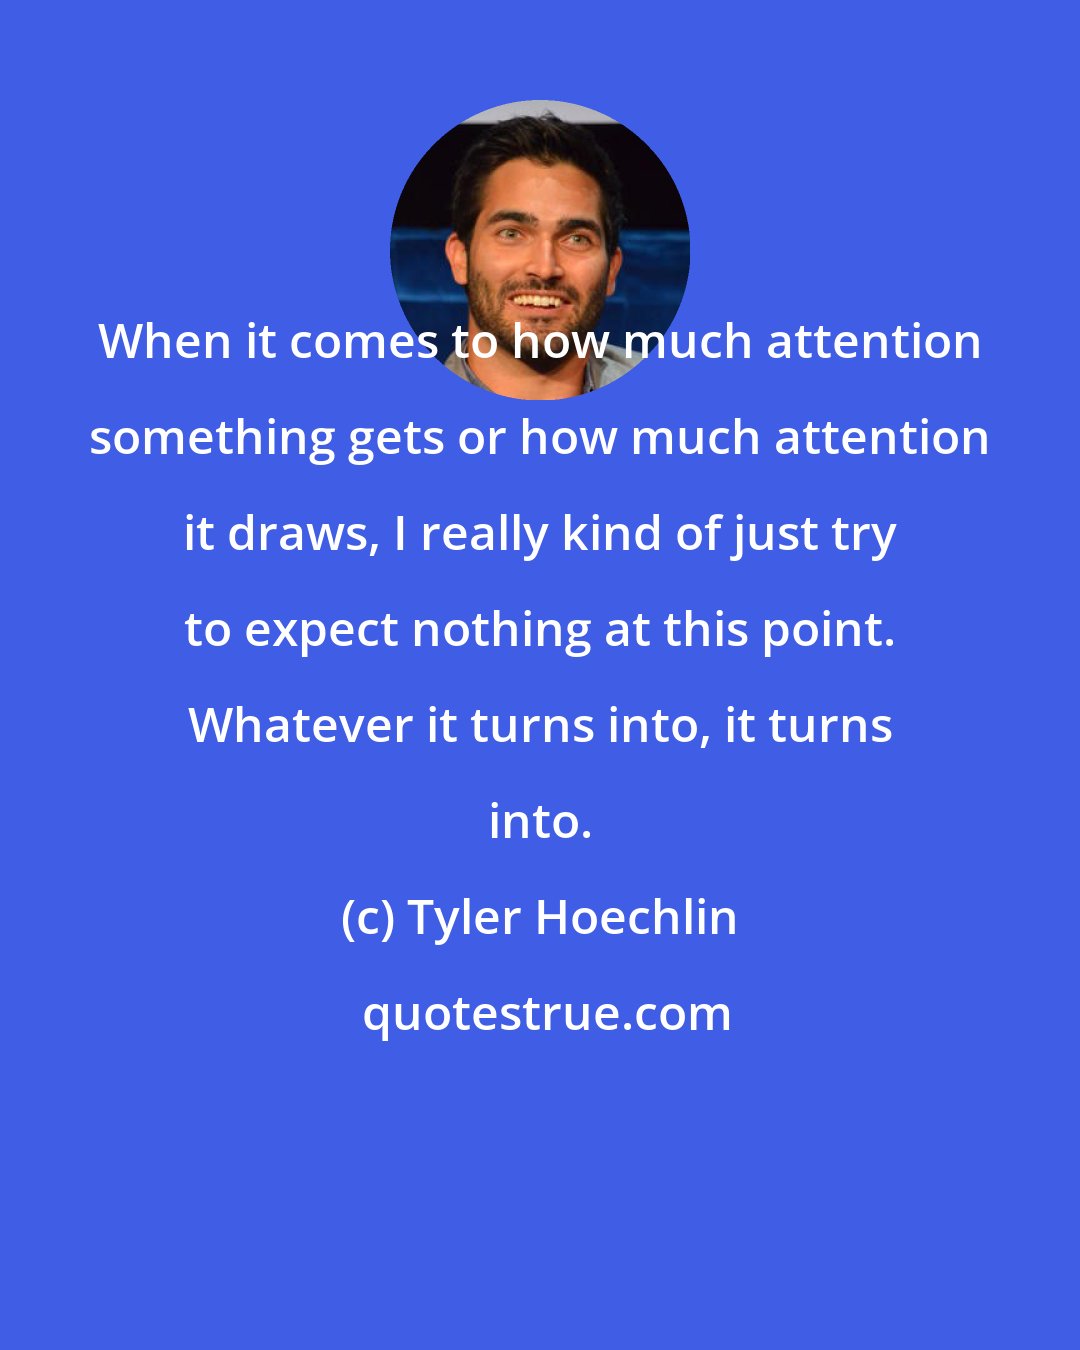 Tyler Hoechlin: When it comes to how much attention something gets or how much attention it draws, I really kind of just try to expect nothing at this point. Whatever it turns into, it turns into.